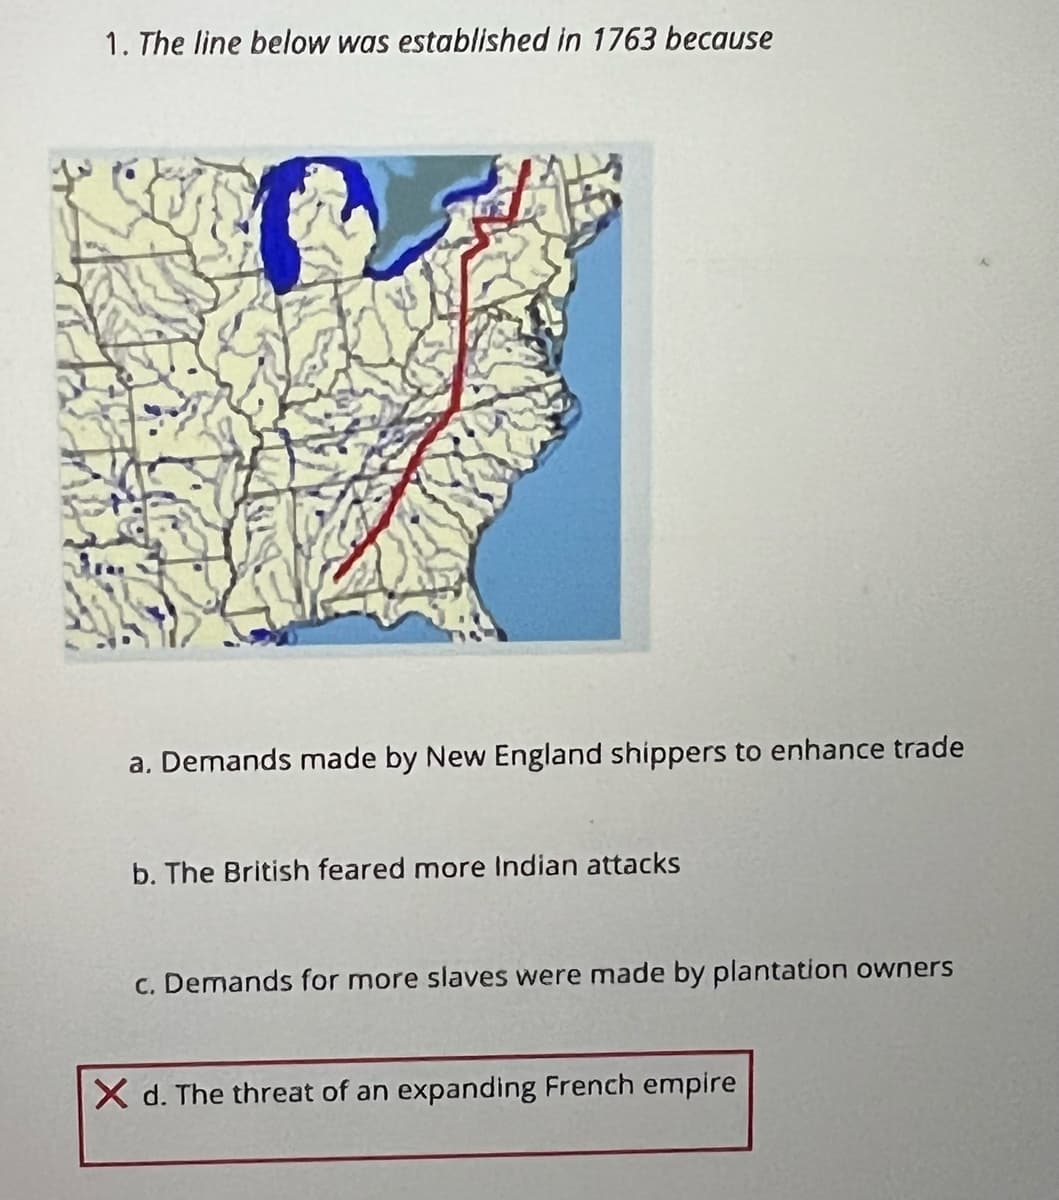 1. The line below was established in 1763 because
a. Demands made by New England shippers to enhance trade
b. The British feared more Indian attacks
C. Demands for more slaves were made by plantation owners
X d. The threat of an expanding French empire
